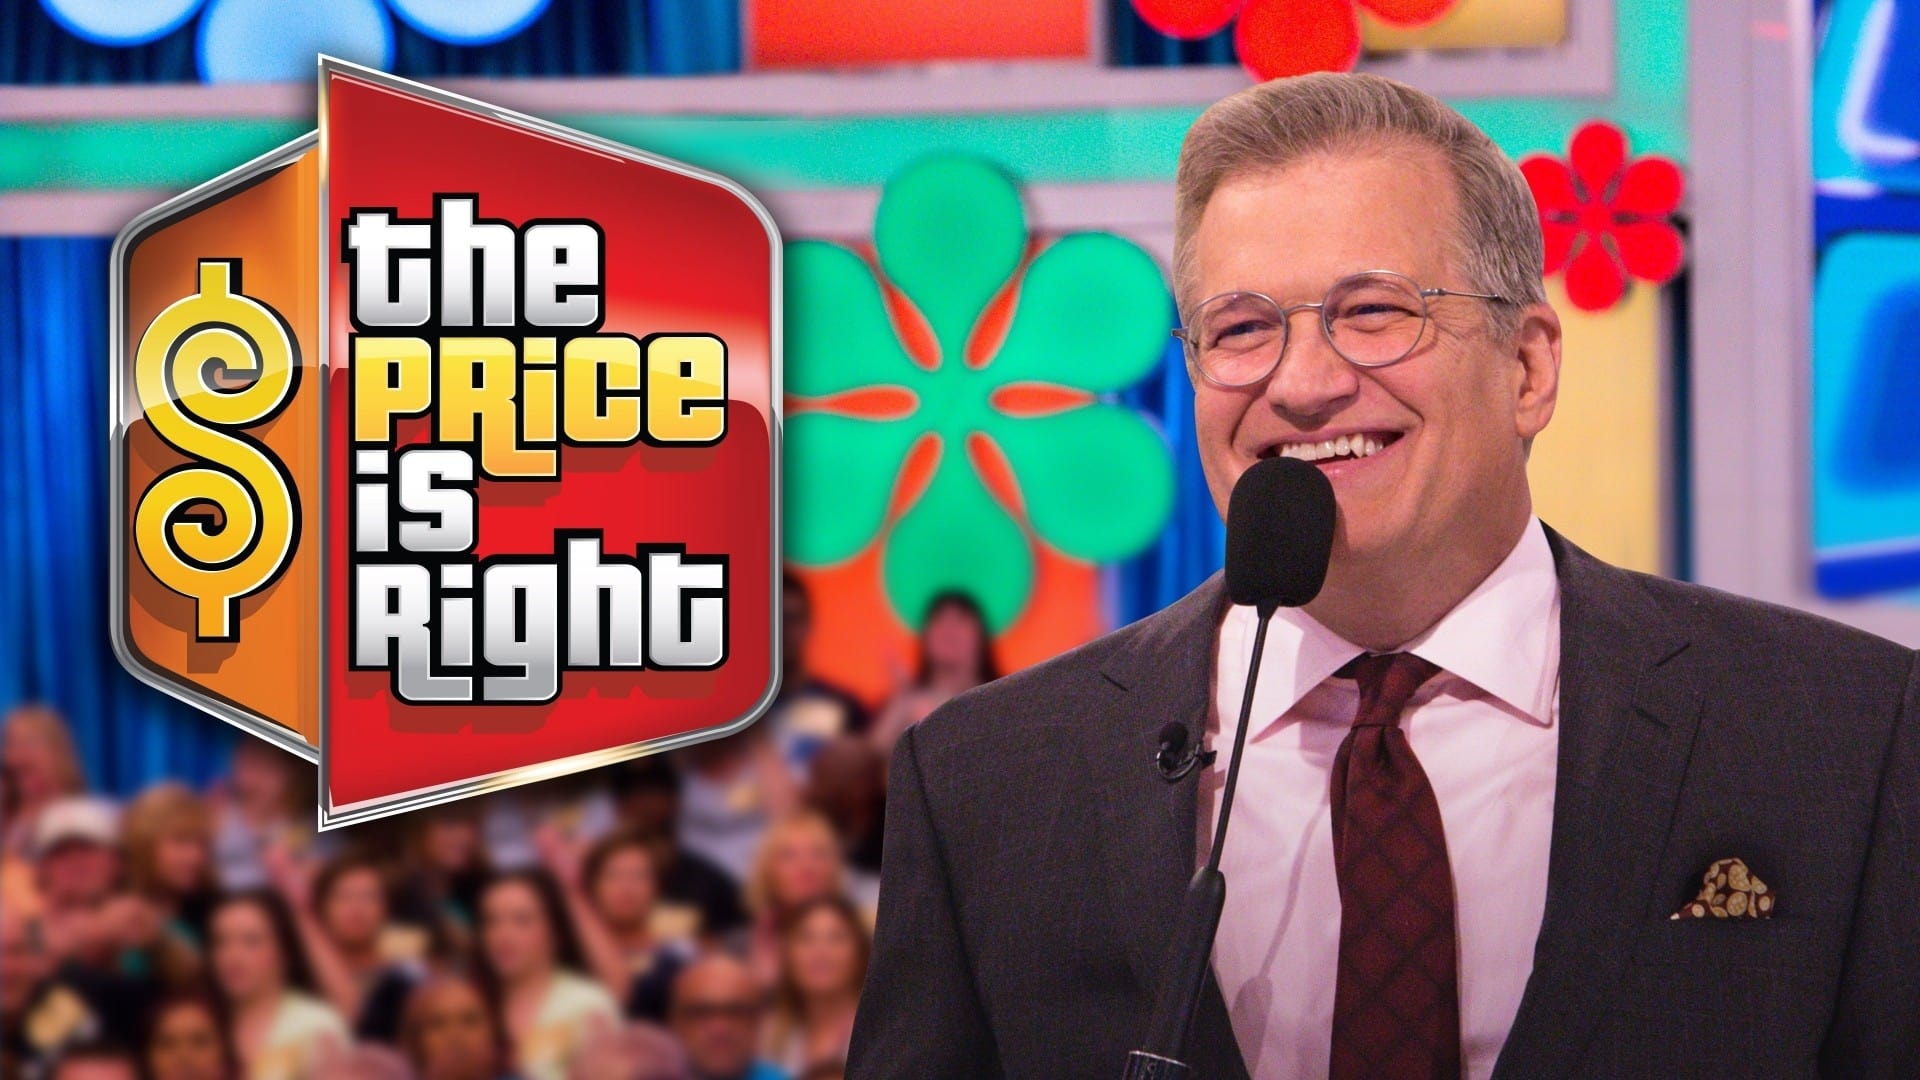 The Price Is Right - Season 5 Episode 134 : The Price Is Right Season 5 Episode 134